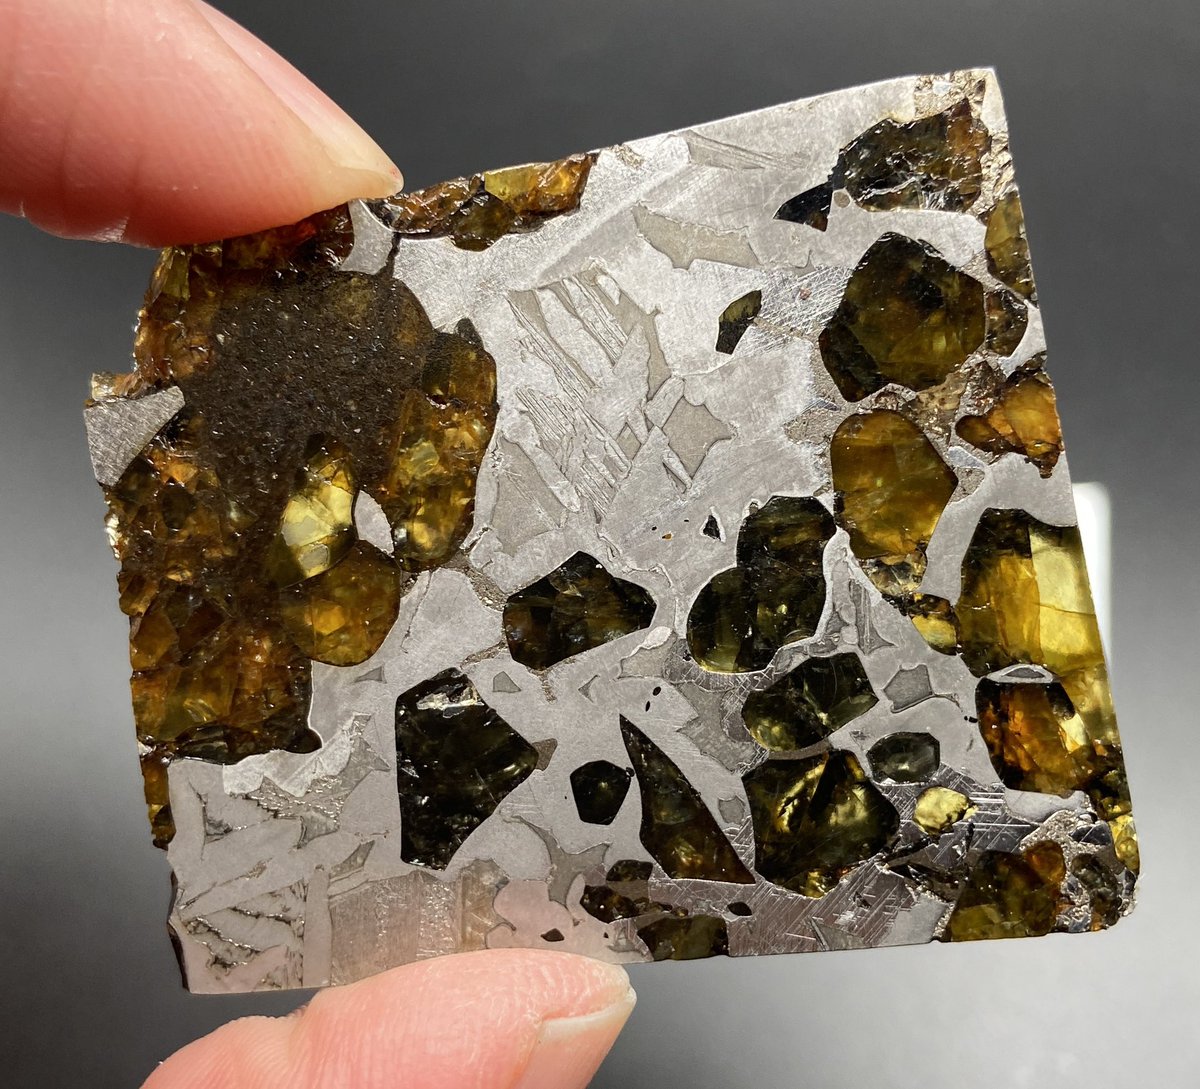 A slice of the Seymchan pallasite meteorite, featuring crystals of olivine in iron-nickel. From the mantle-core boundary of planetesimals. Pallasite are named after naturalist Peter Pallas (Pallas cat) who studied a specimen in 1772.